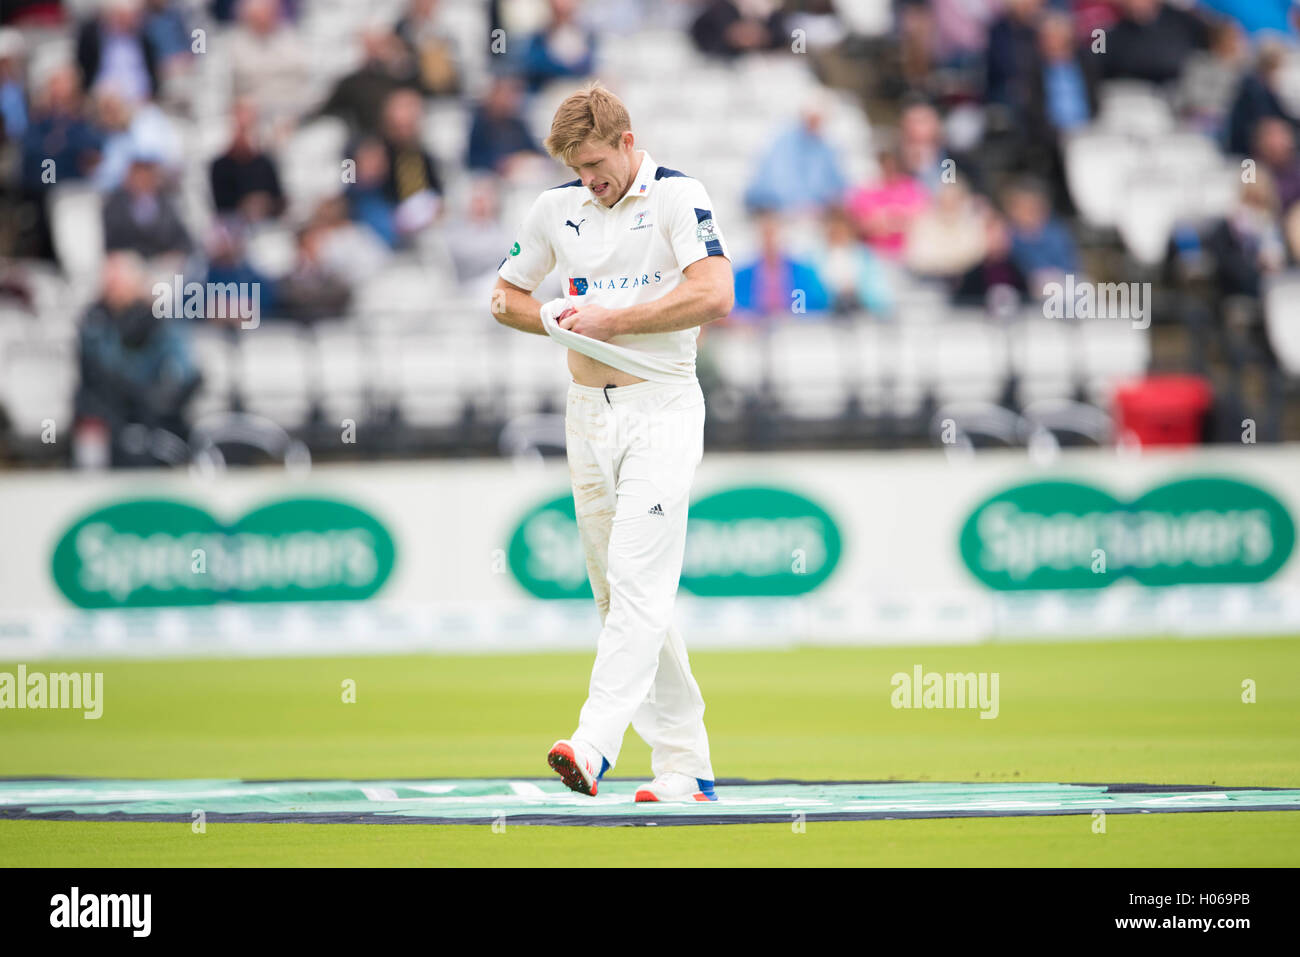 London, UK. 20th Sep, 2016. Yorkshire bowler David Willey prepares to bowls during day one of the Specsavers County Championship Division One match between Middlesex and Yorkshire at Lords on September 20, 2016 in London, England Credit:  Michael Jamison/Alamy Live News Stock Photo